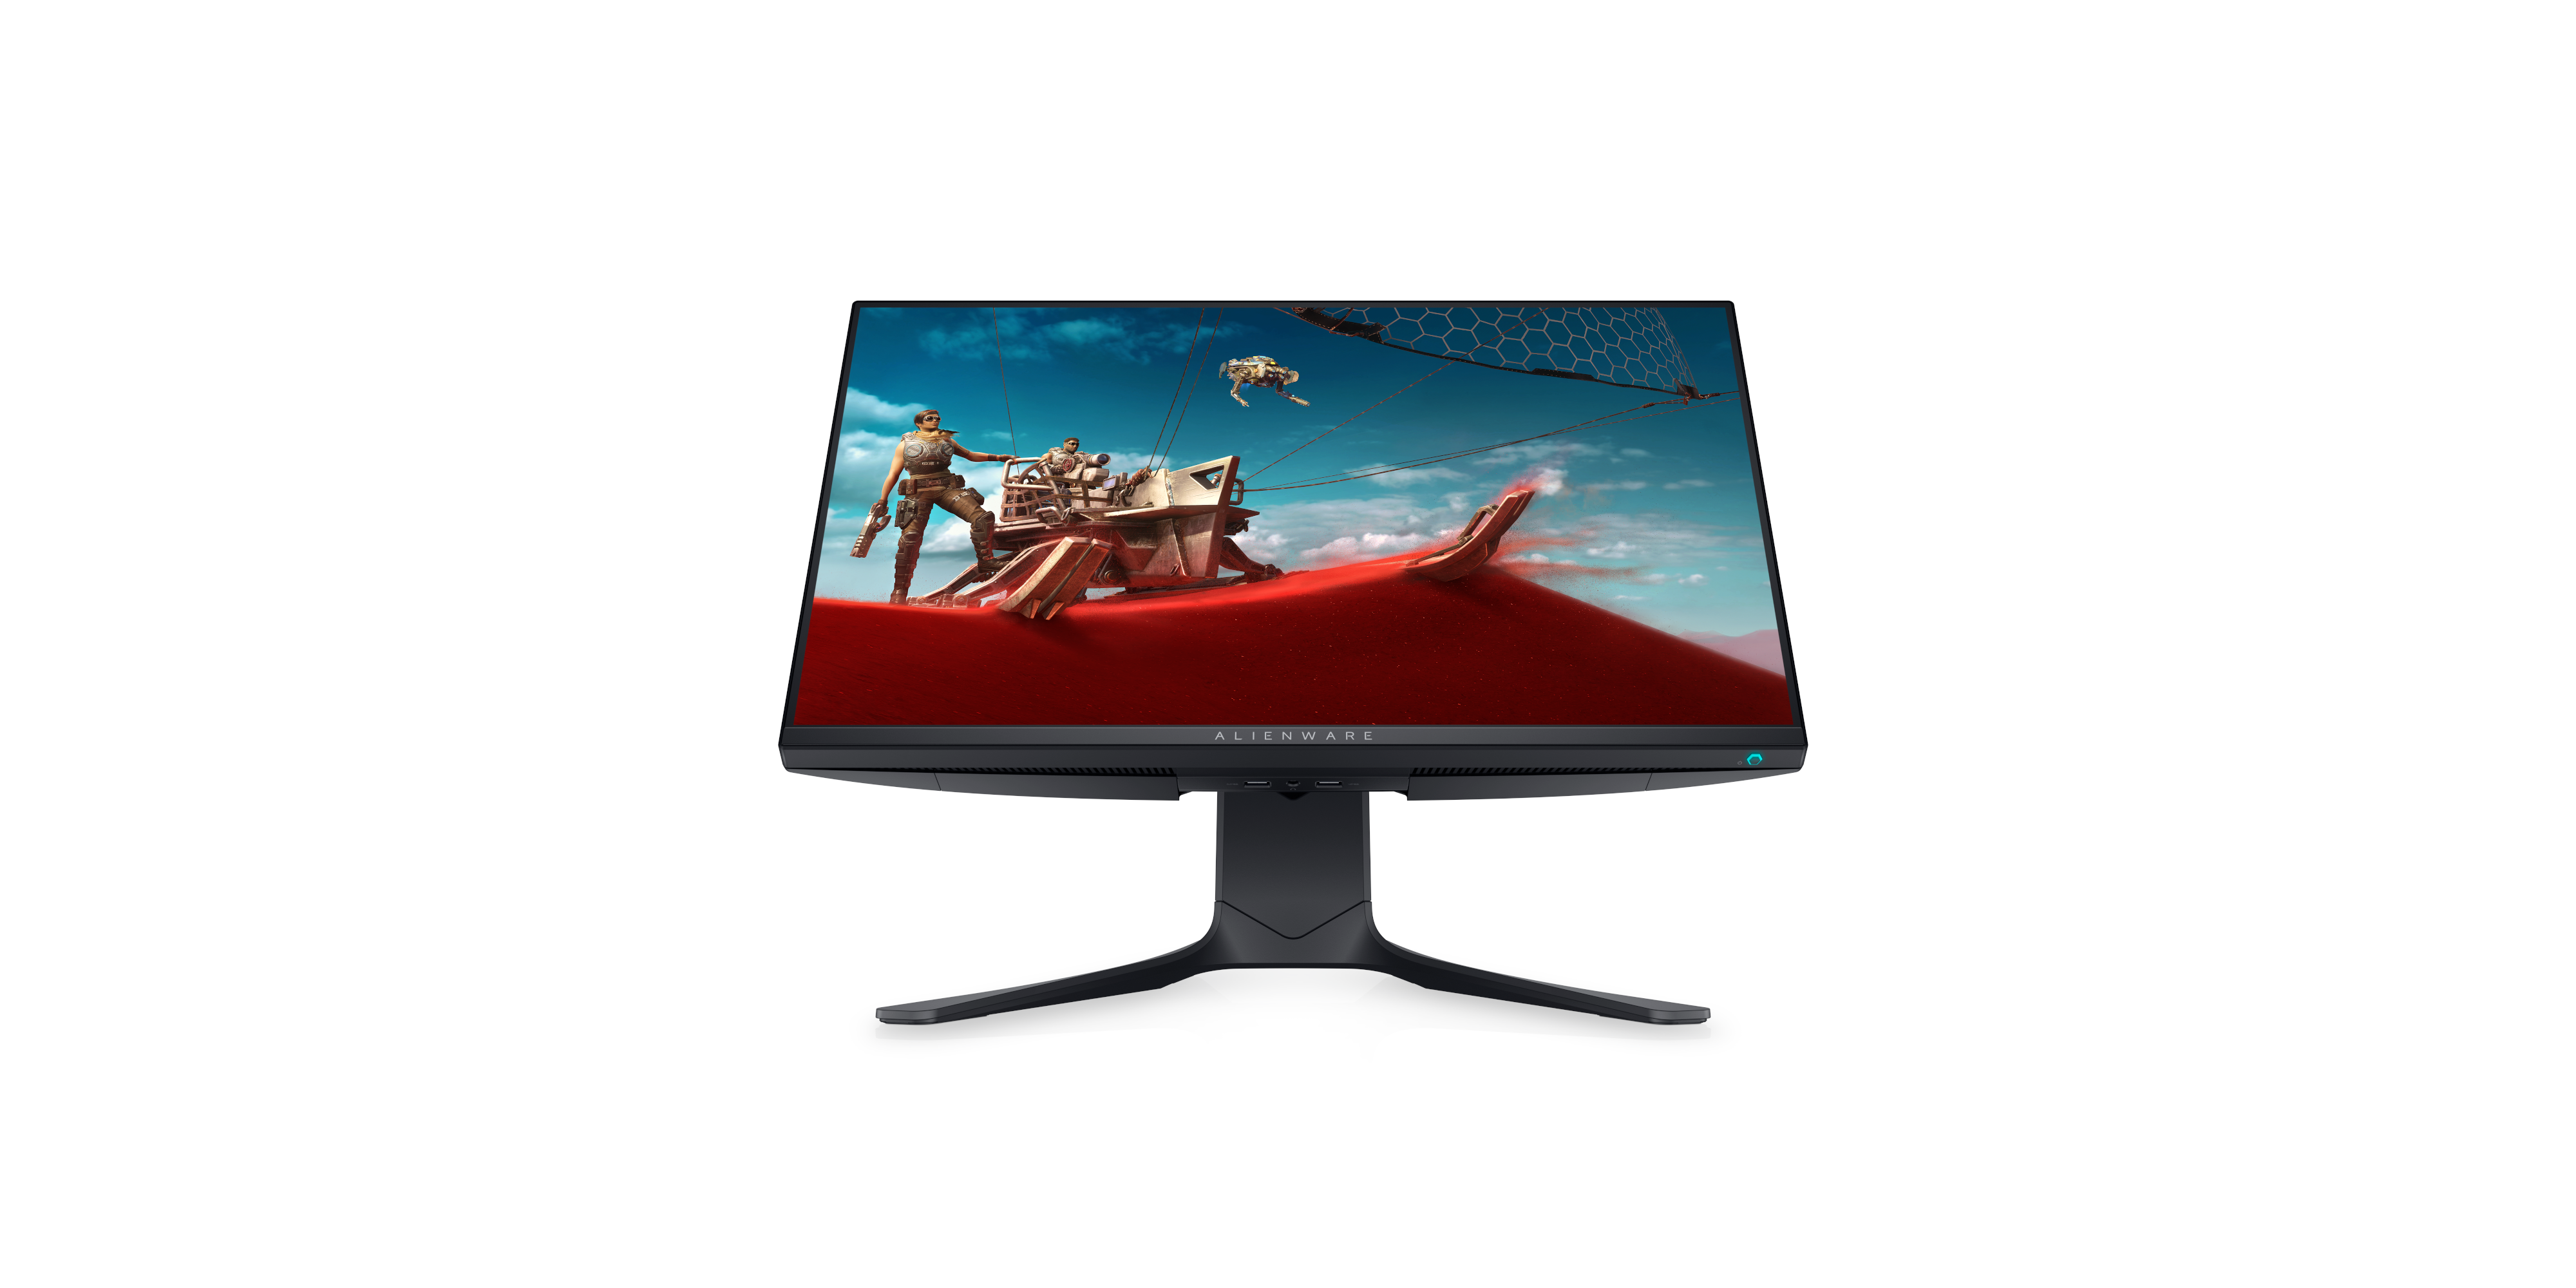 Dell's 240Hz IPS Gaming Monitor Announced — AlienWare 25″ AW2521HF